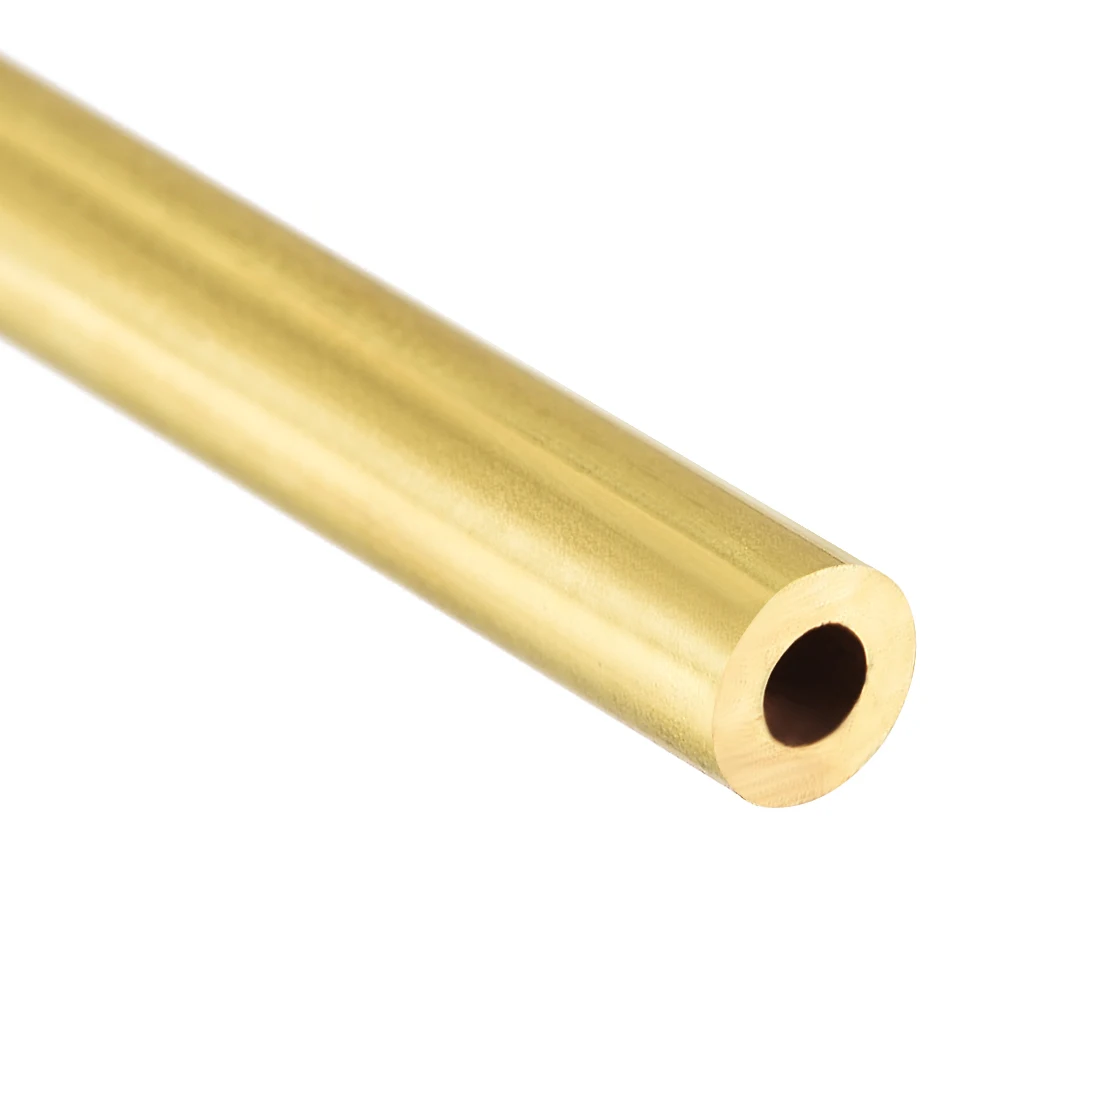 uxcell Brass Round Tube 300mm Length 4mm OD 1mm Wall Thickness Seamless Straight Pipe Tubing 2 Pcs